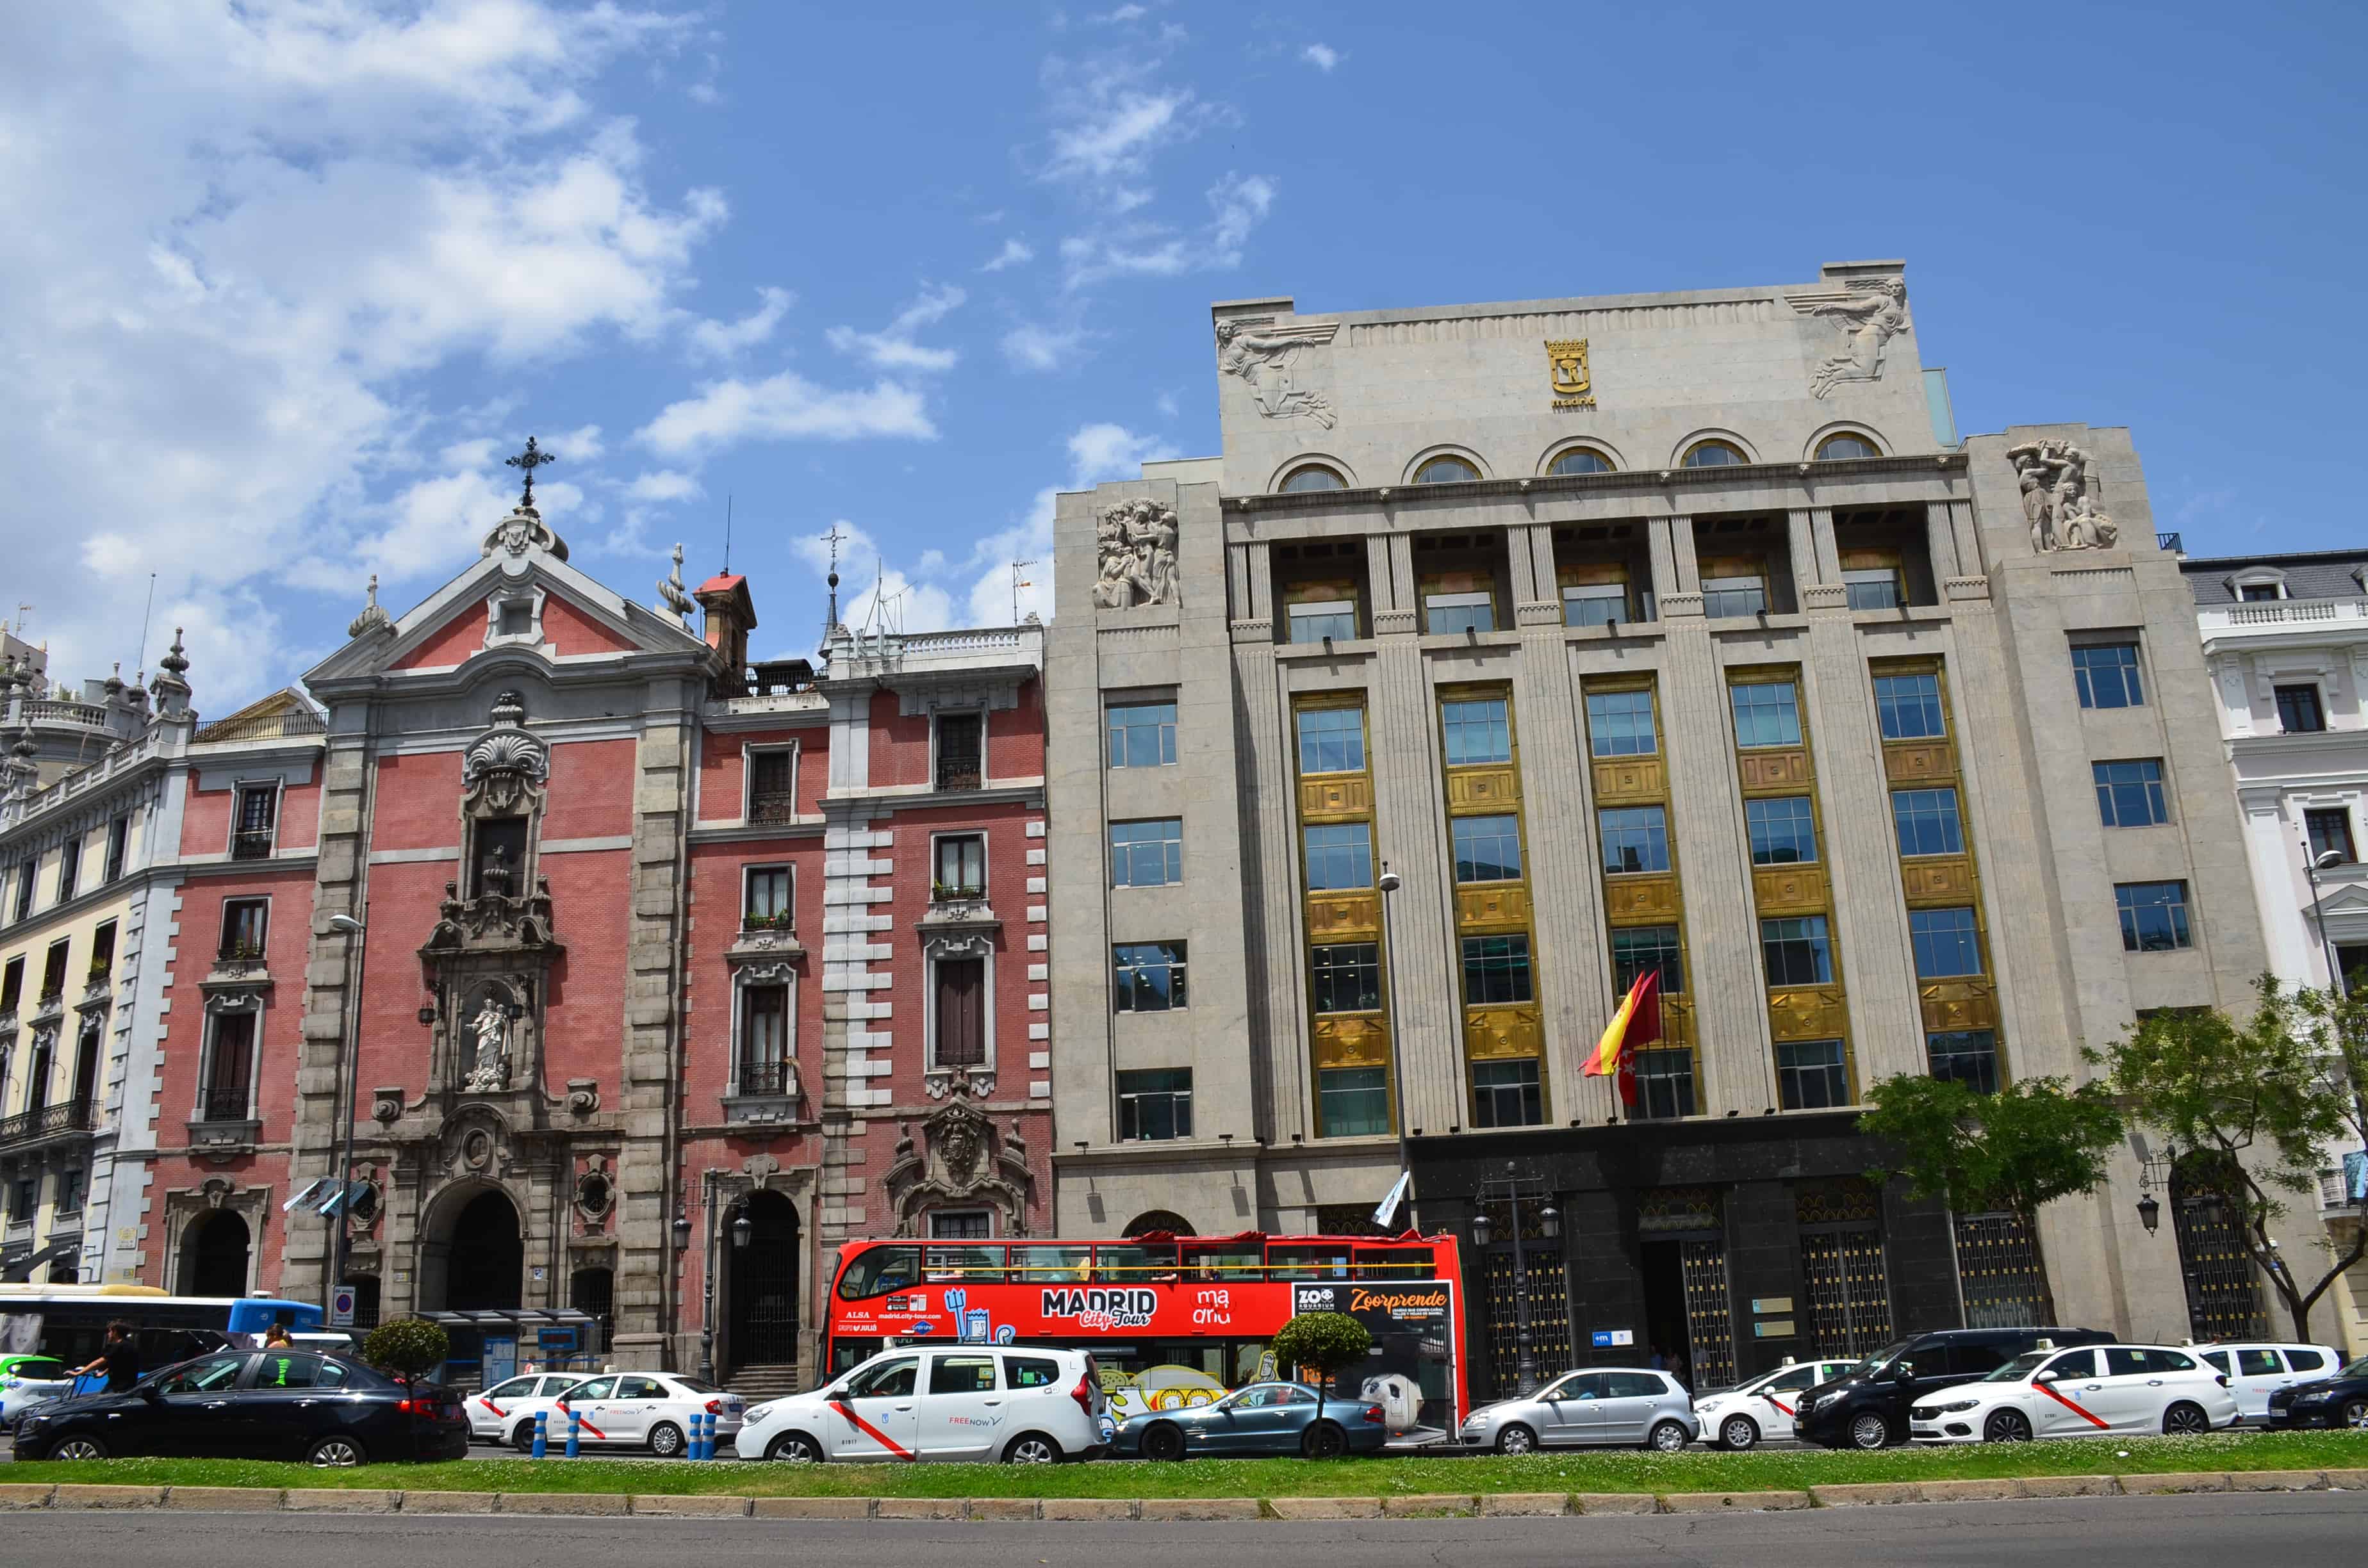 Church of San José (left) and Ministry of Finance and Public Administration (right)